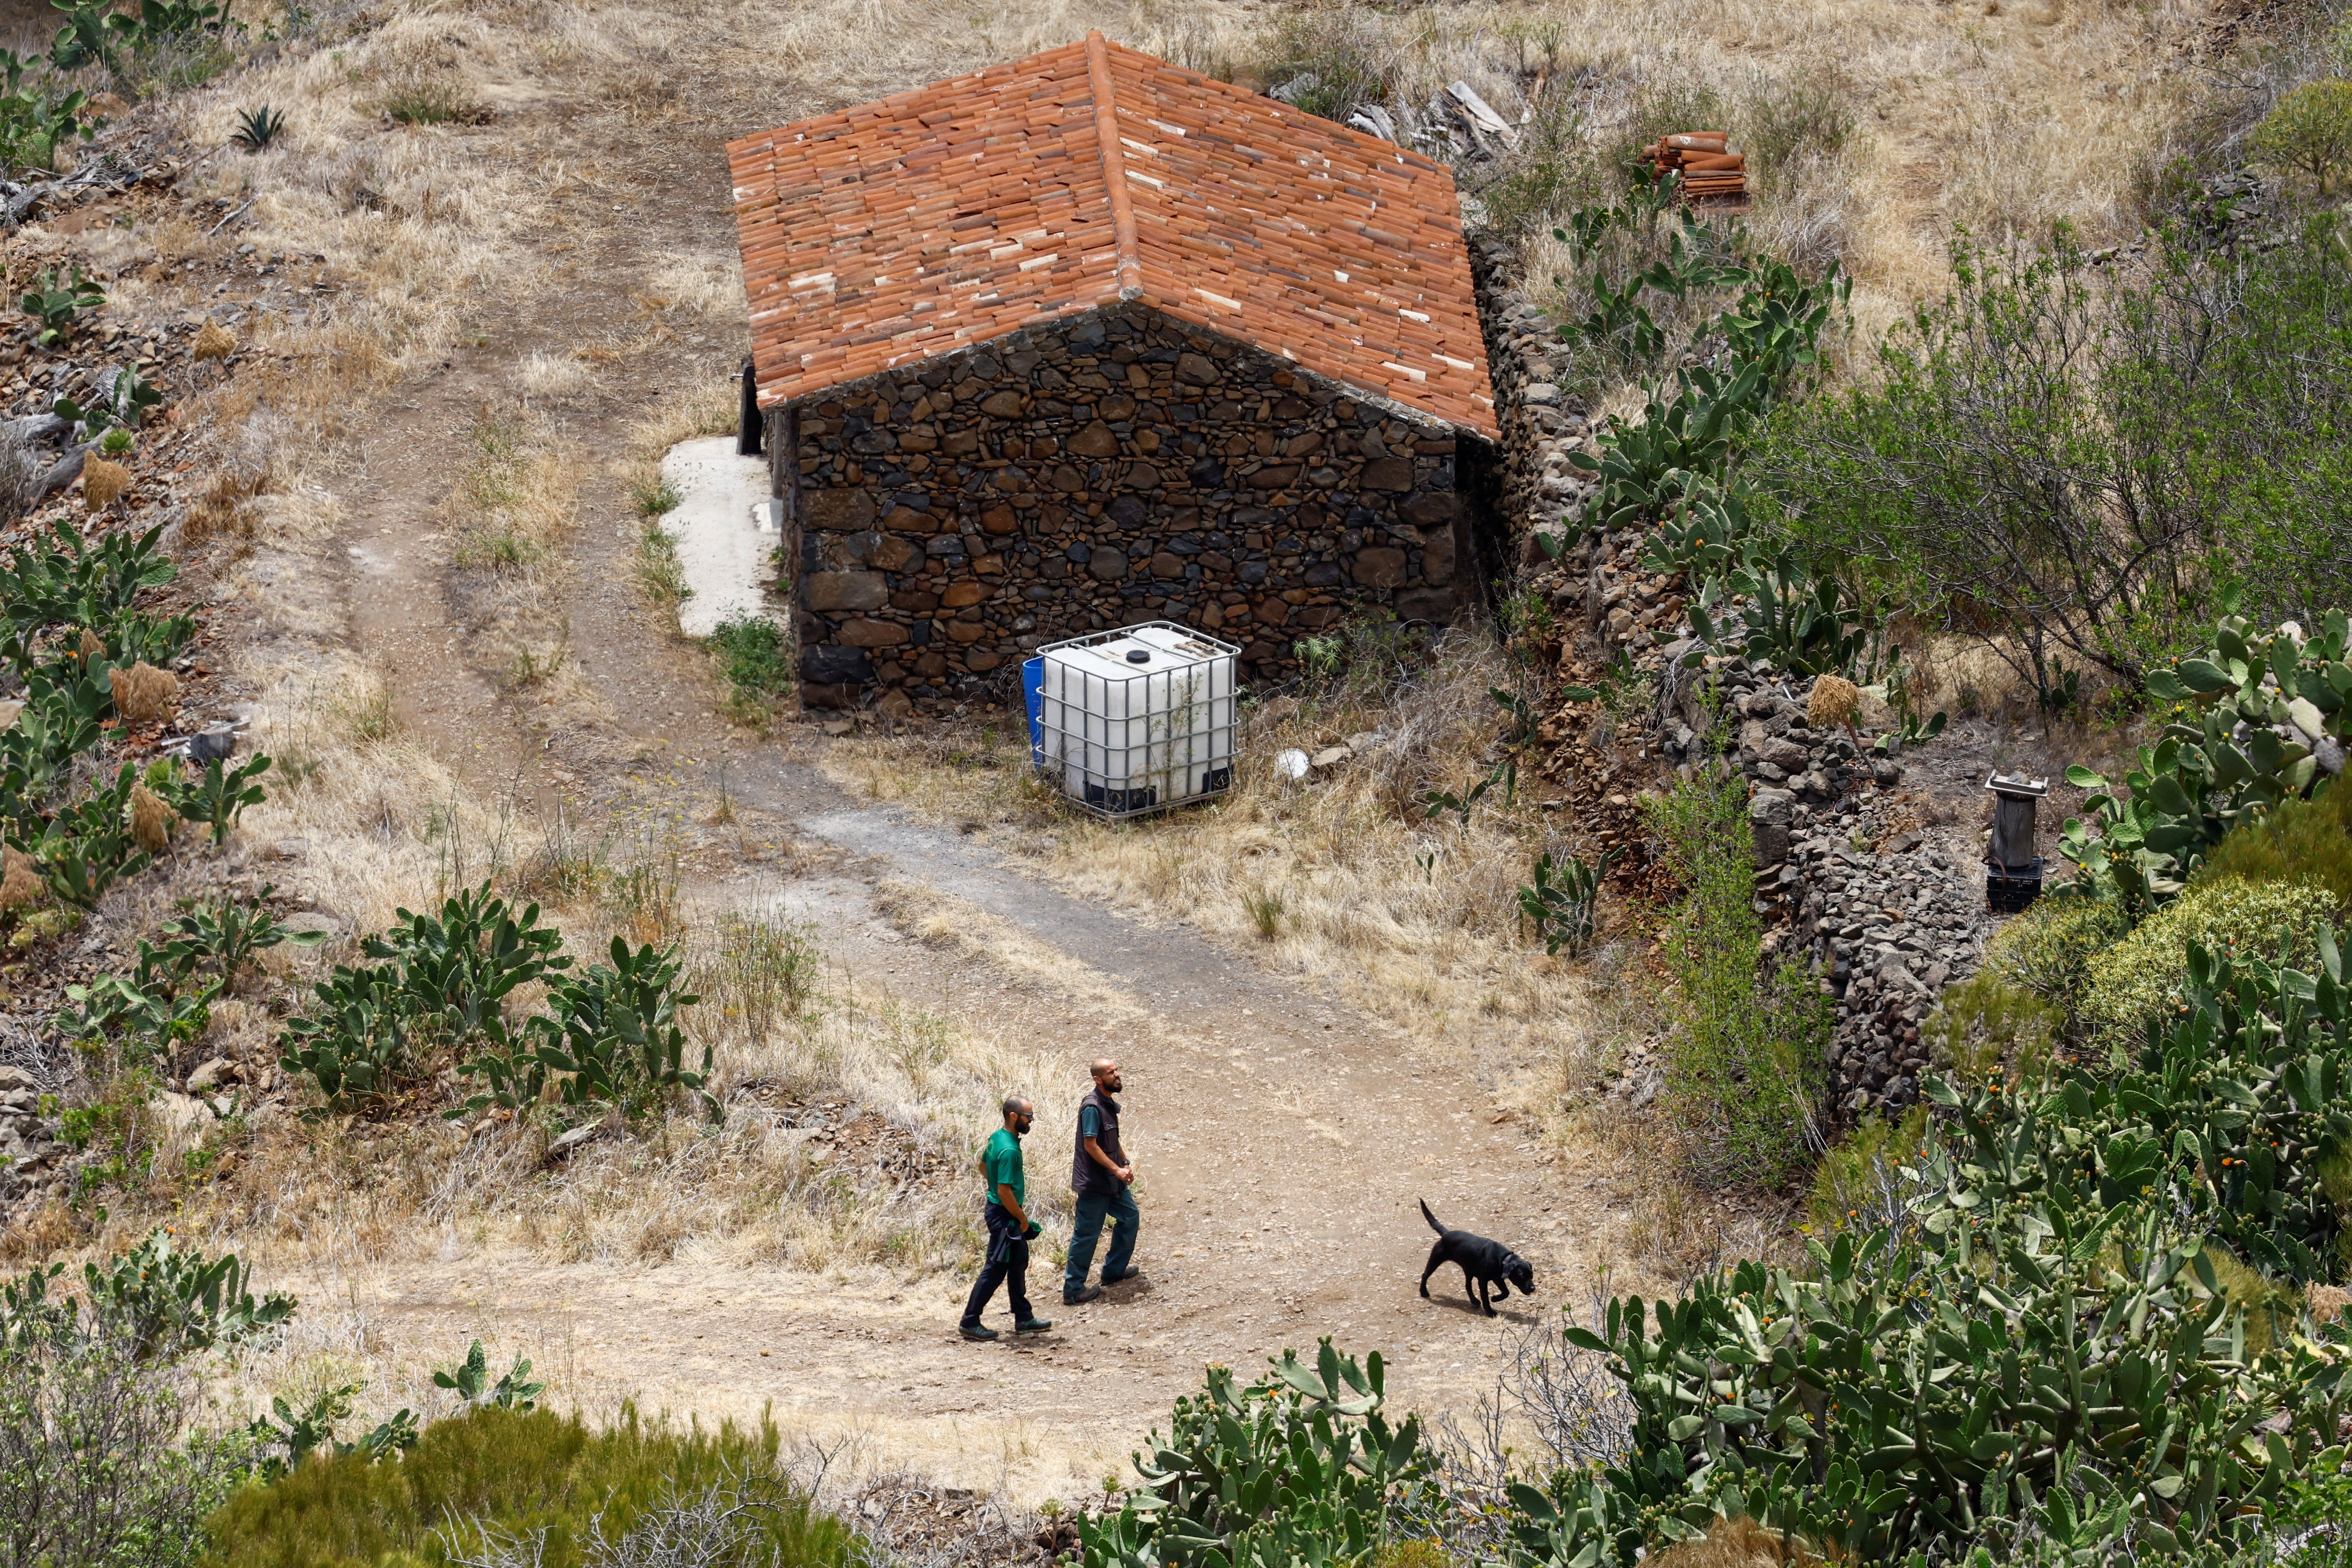 Guardia Civil officers use a dog to search for Jay Slater in the Masca ravine, on the island of Tenerife